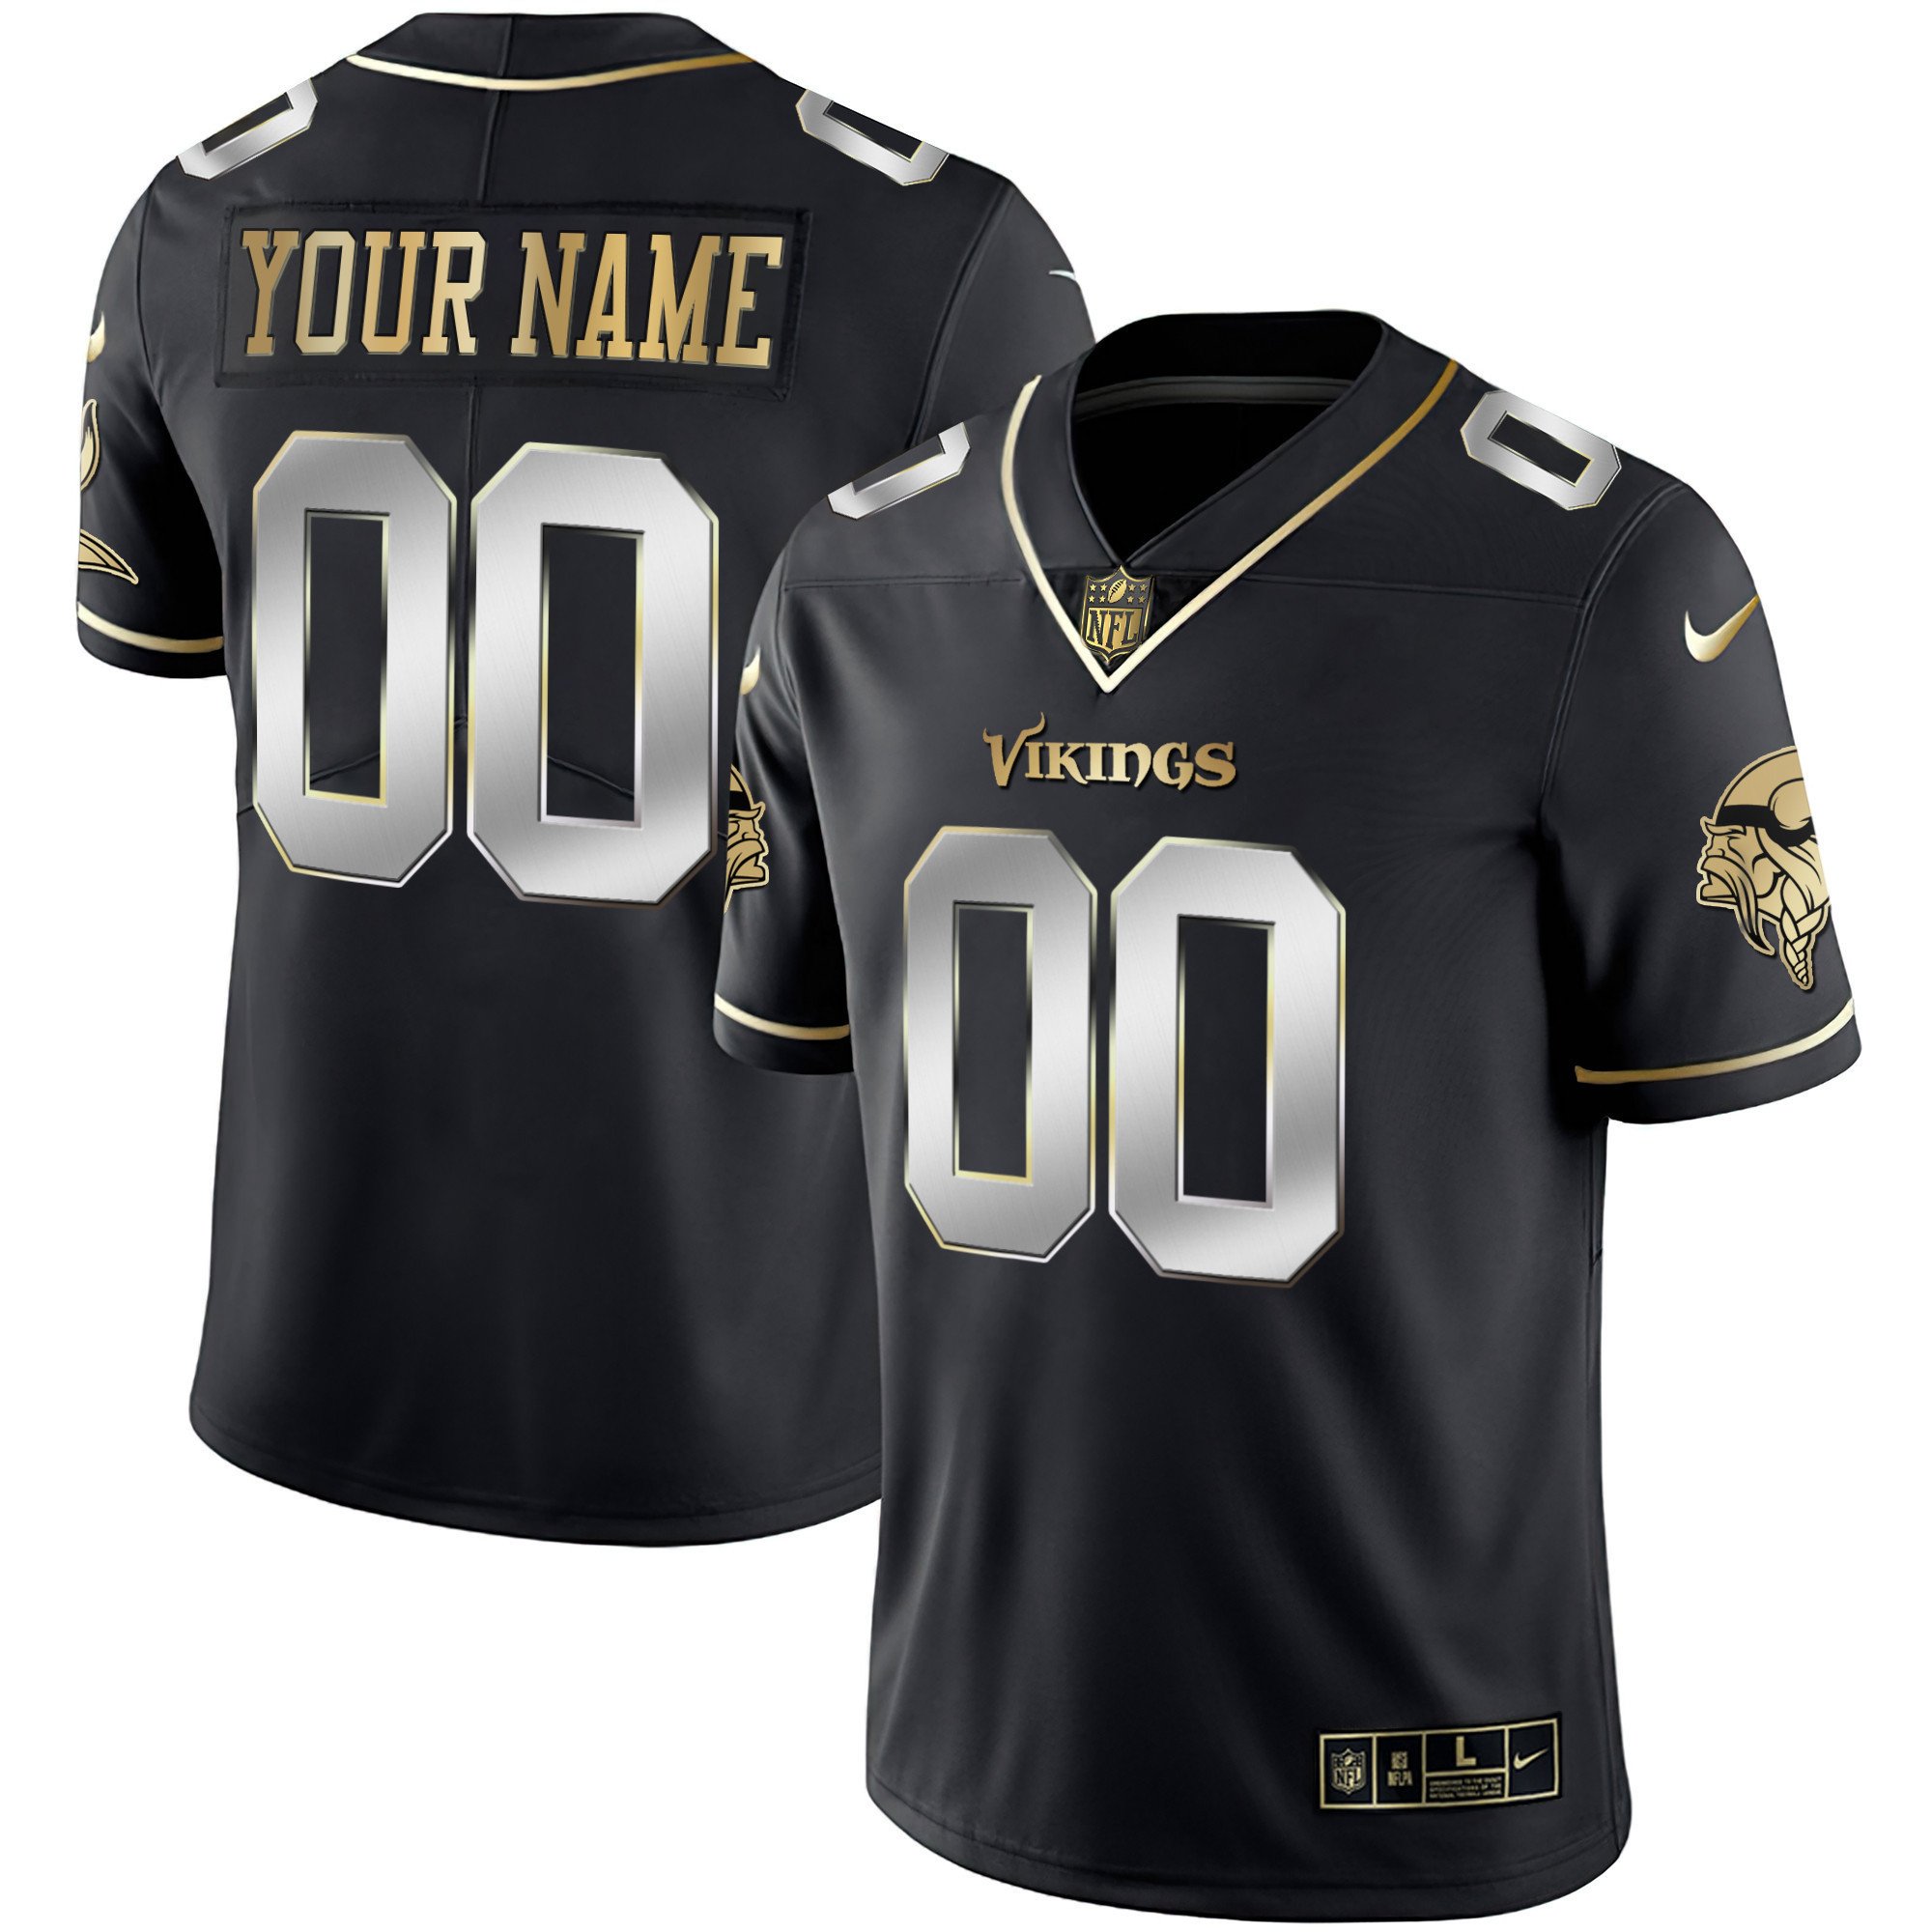 Vikings Custom Name & Custom Number Jersey - All Stitched - Vgear